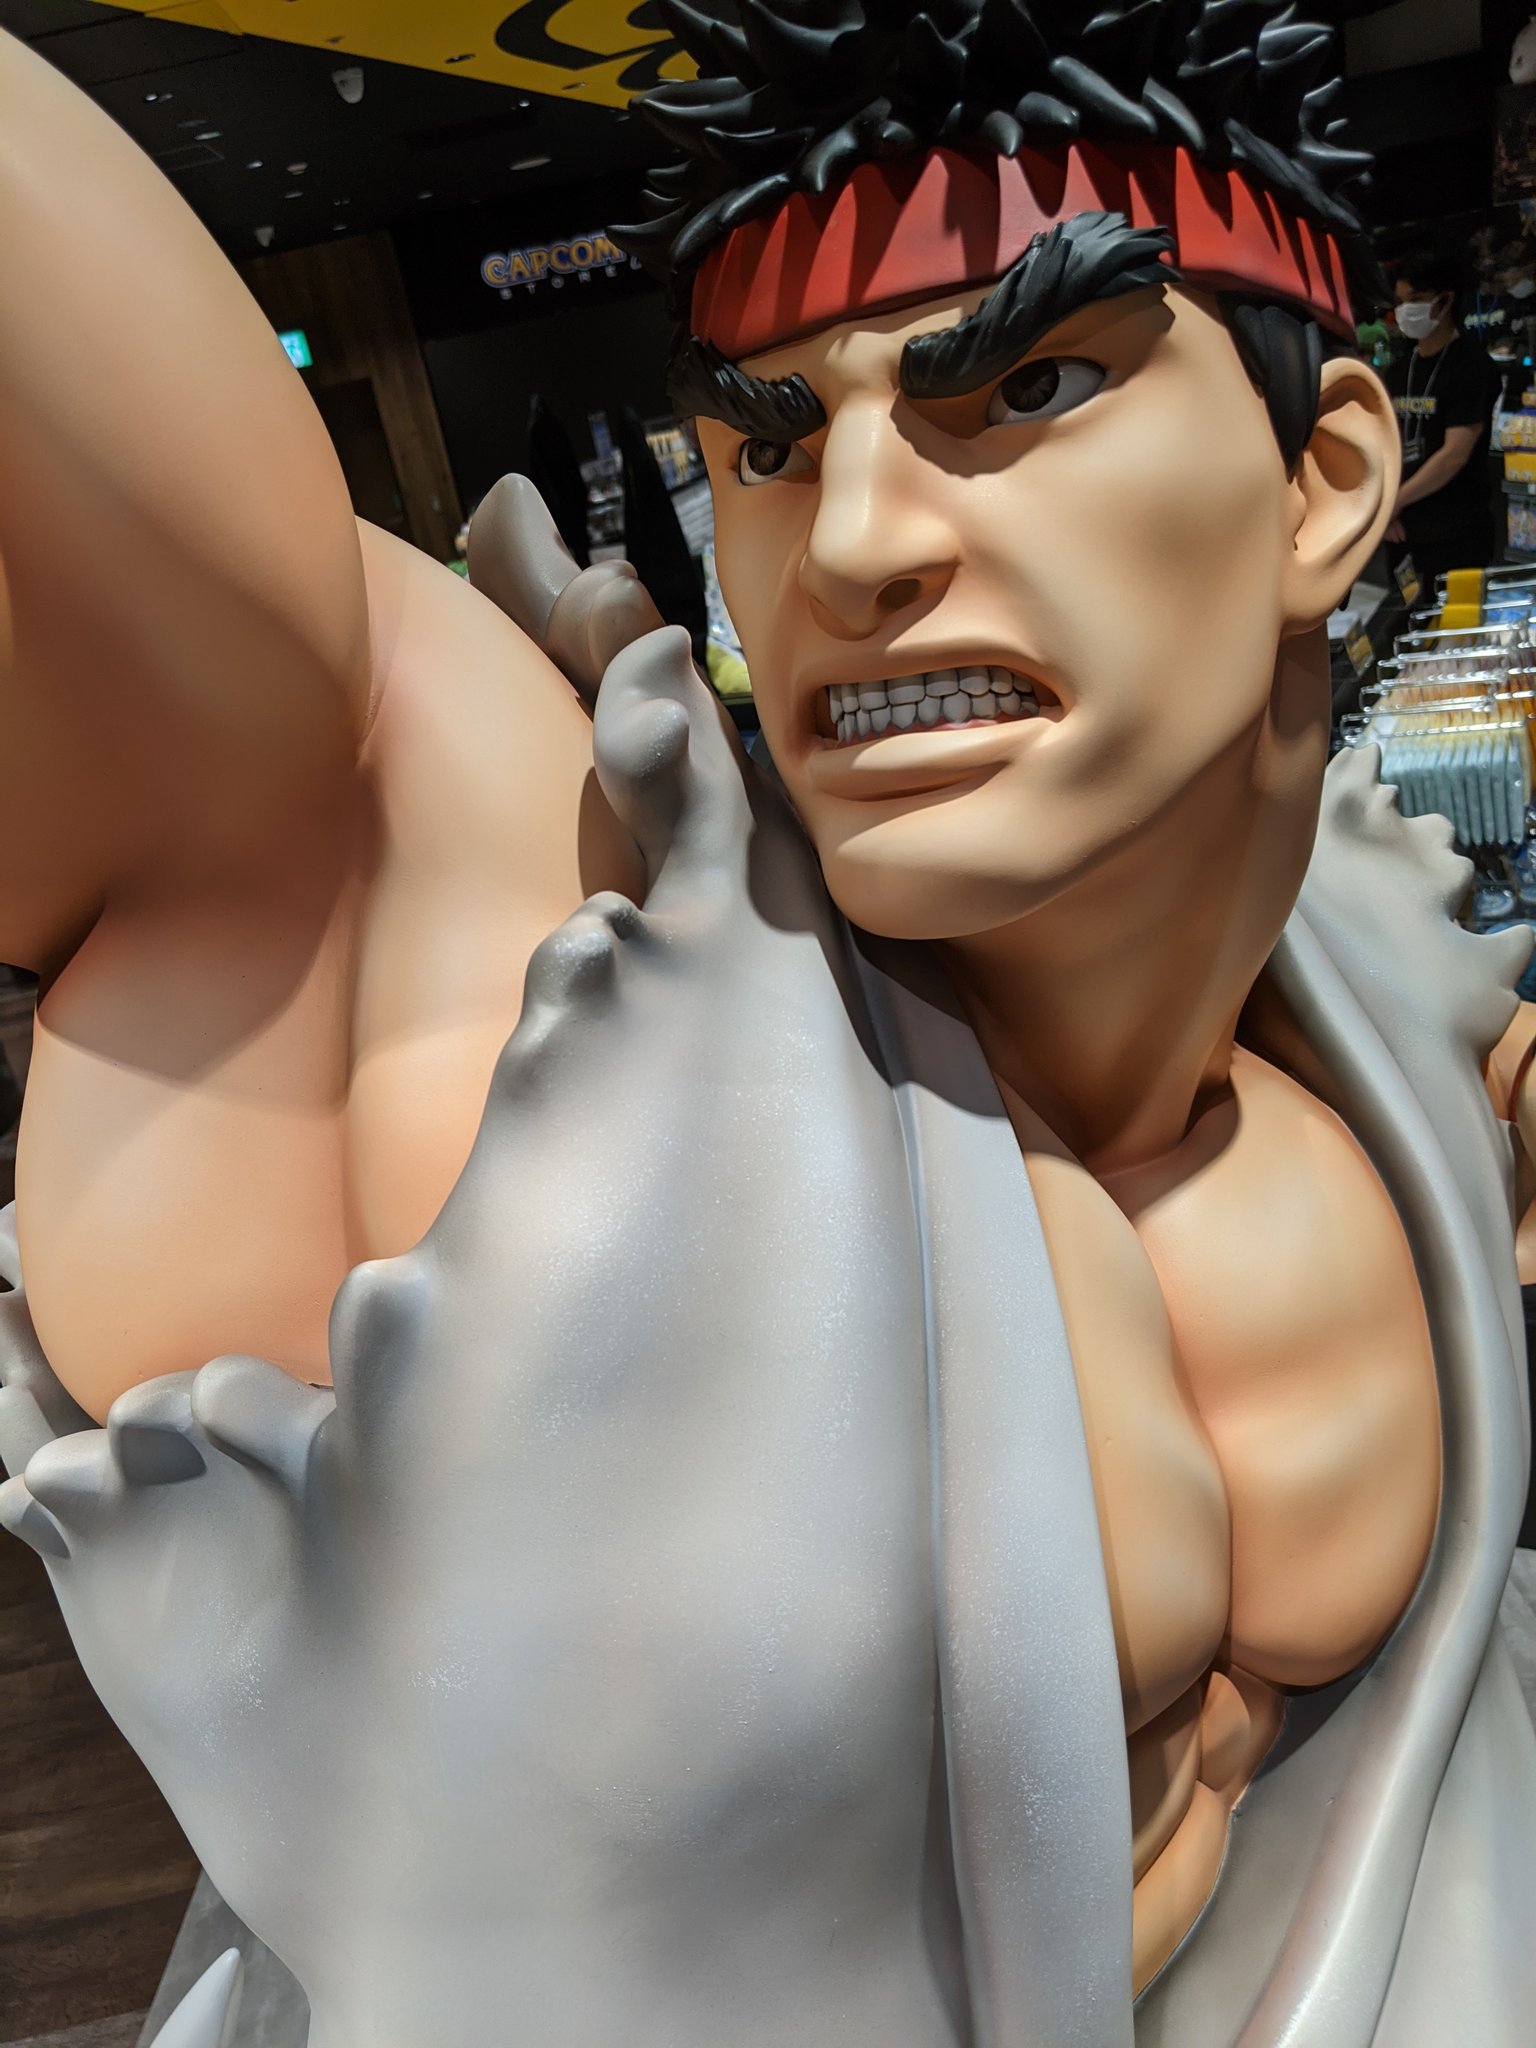 Ryu has an Exciting New Form Courtesy of Street Fighter Duel